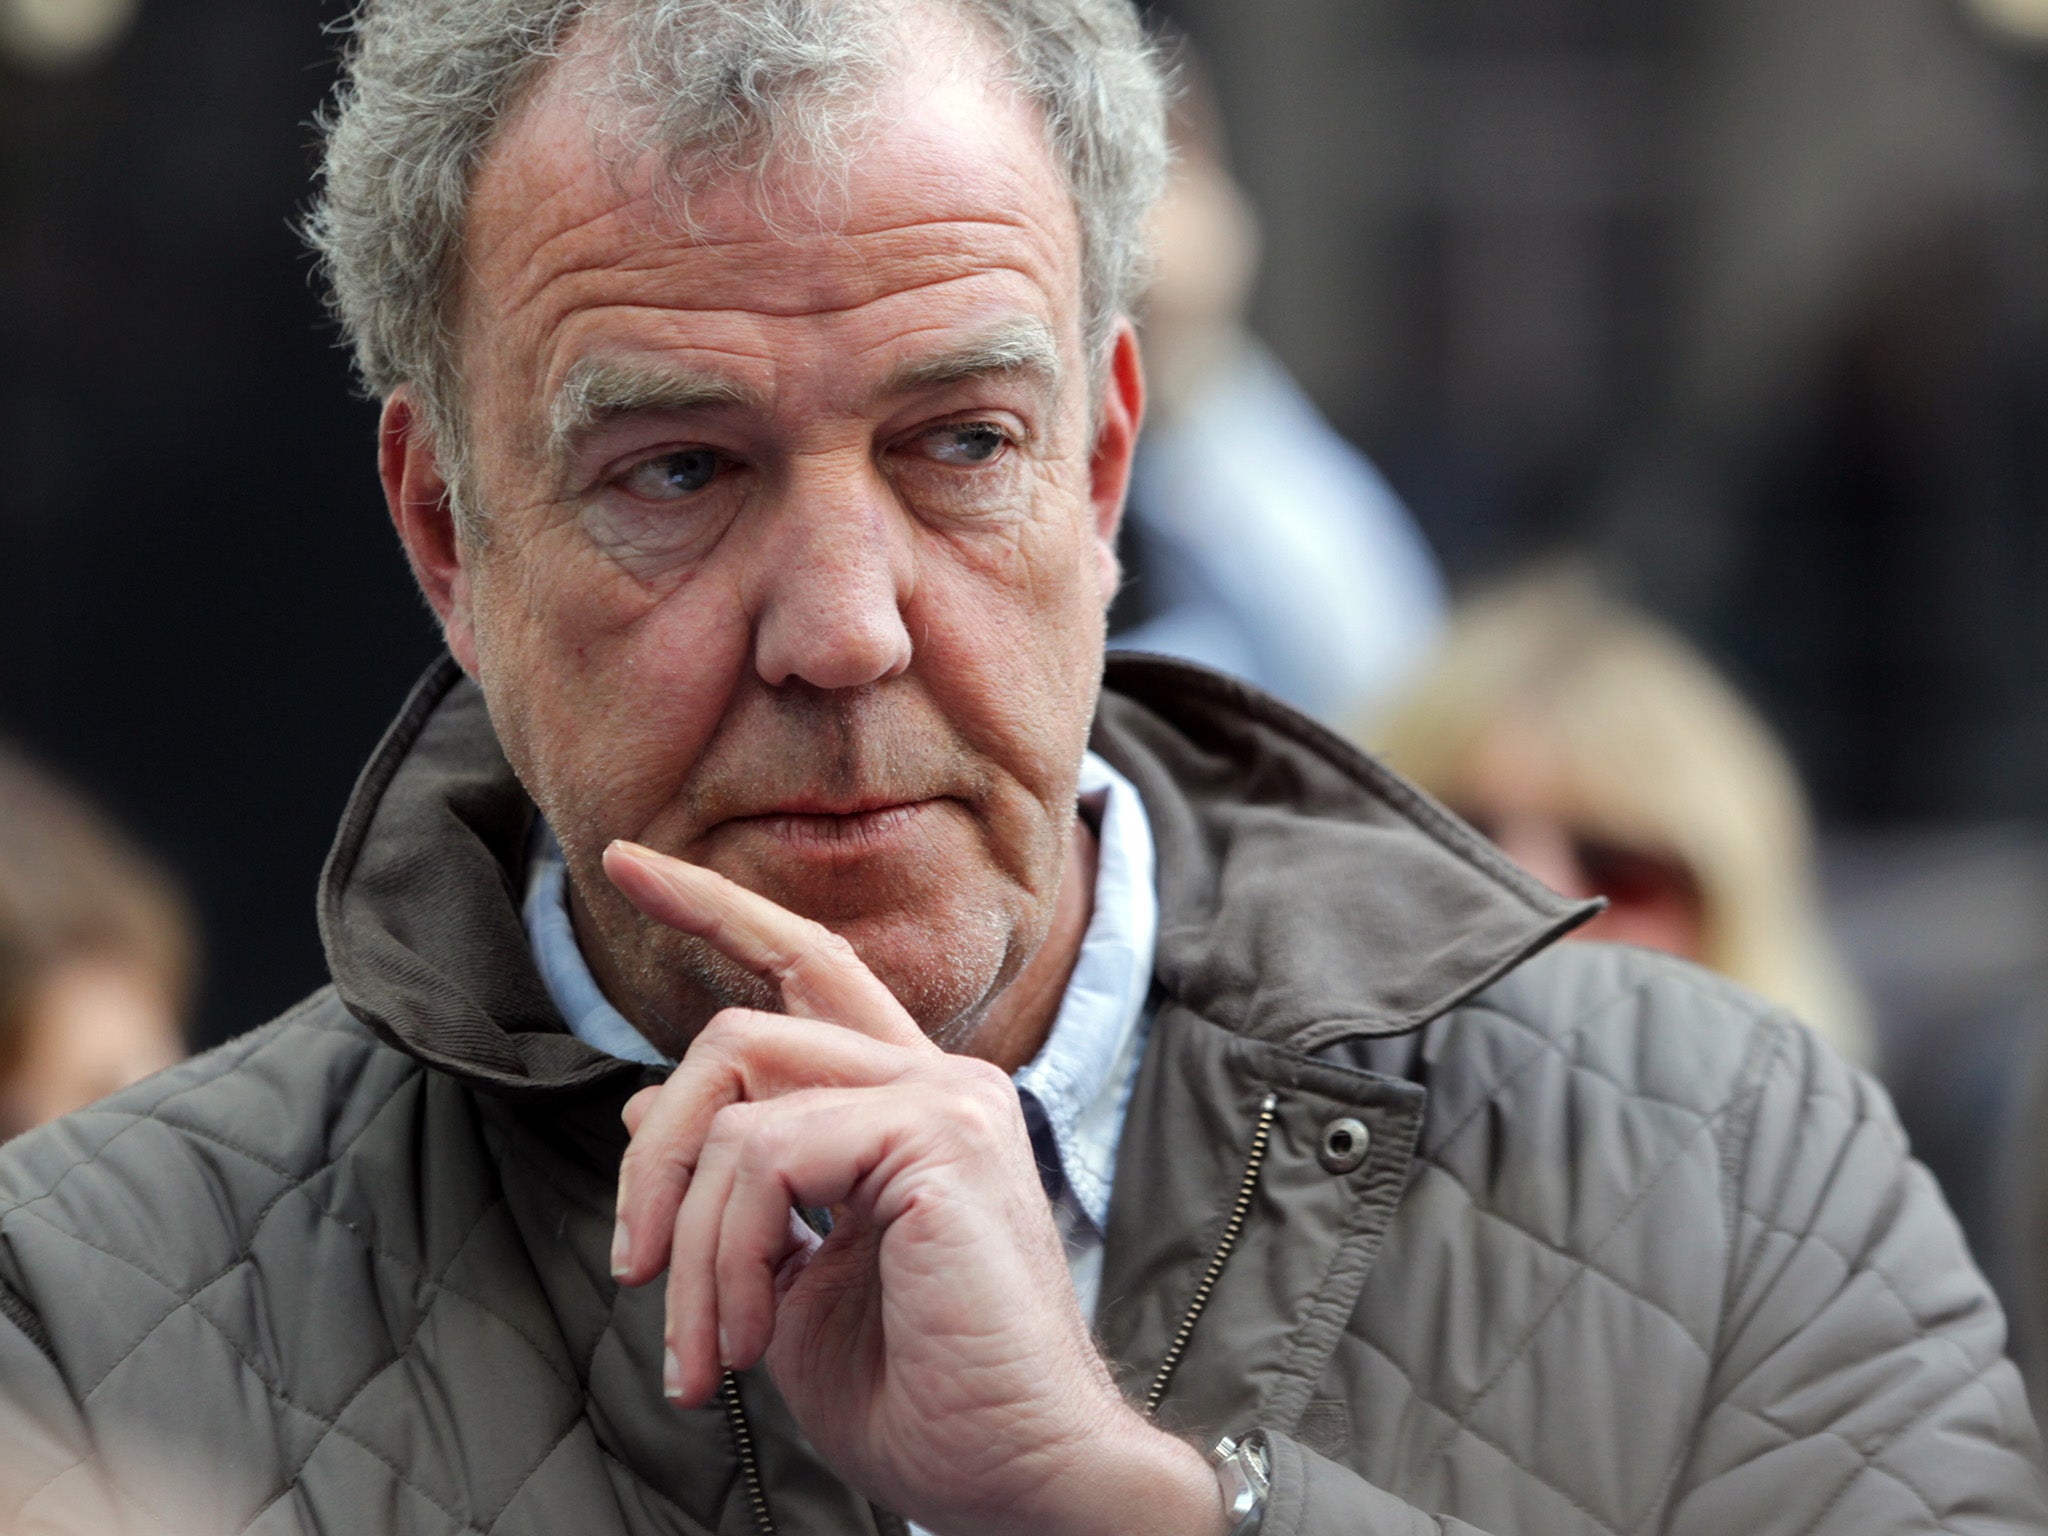 Jeremy Clarkson's daughter is not a fan of his backseat driving